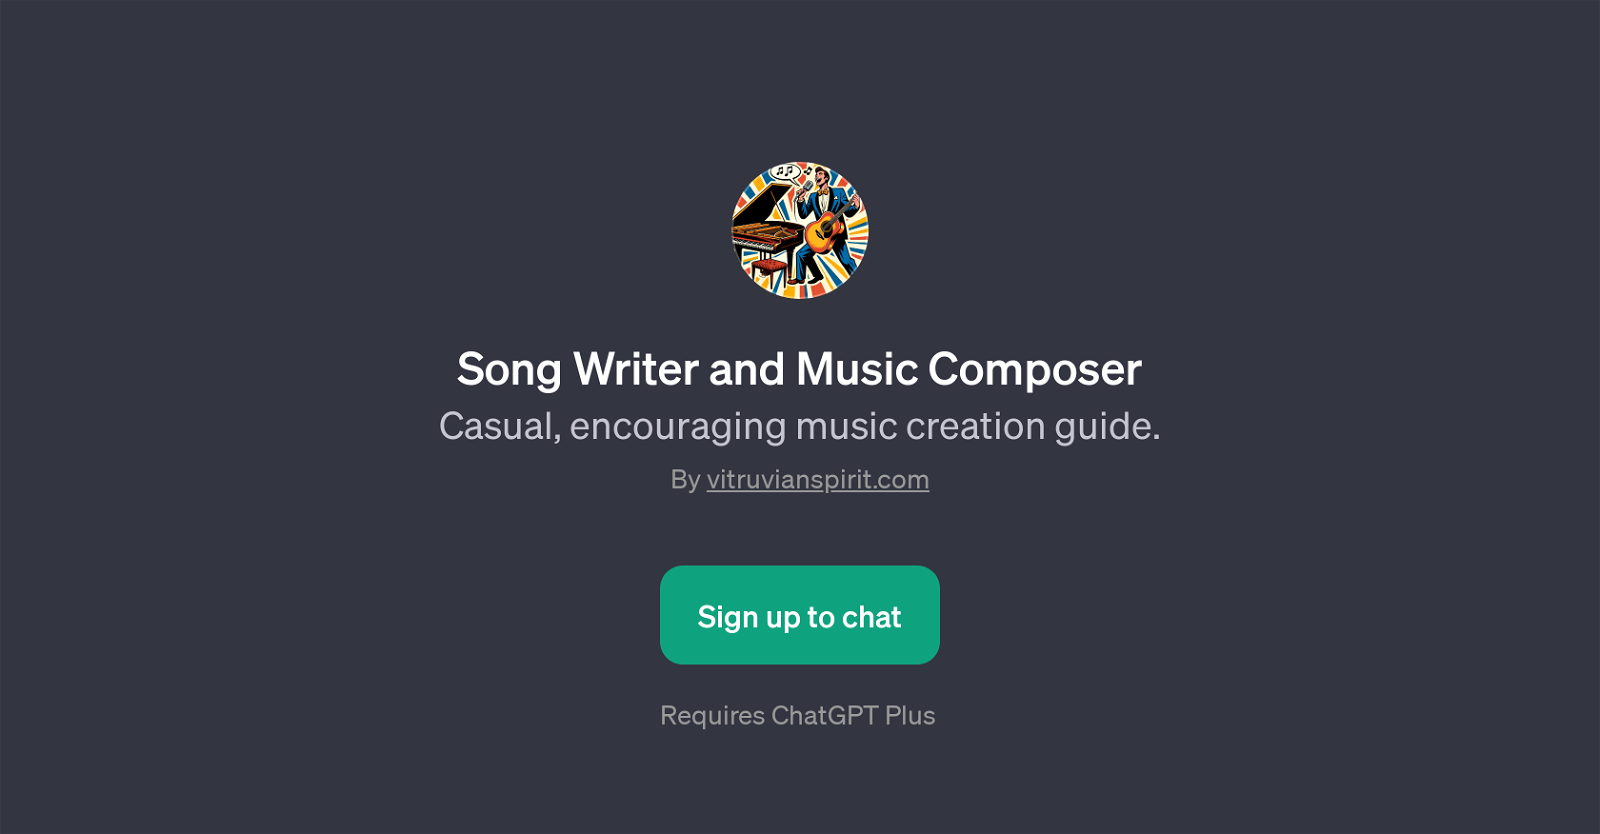 Song Writer and Music Composer website